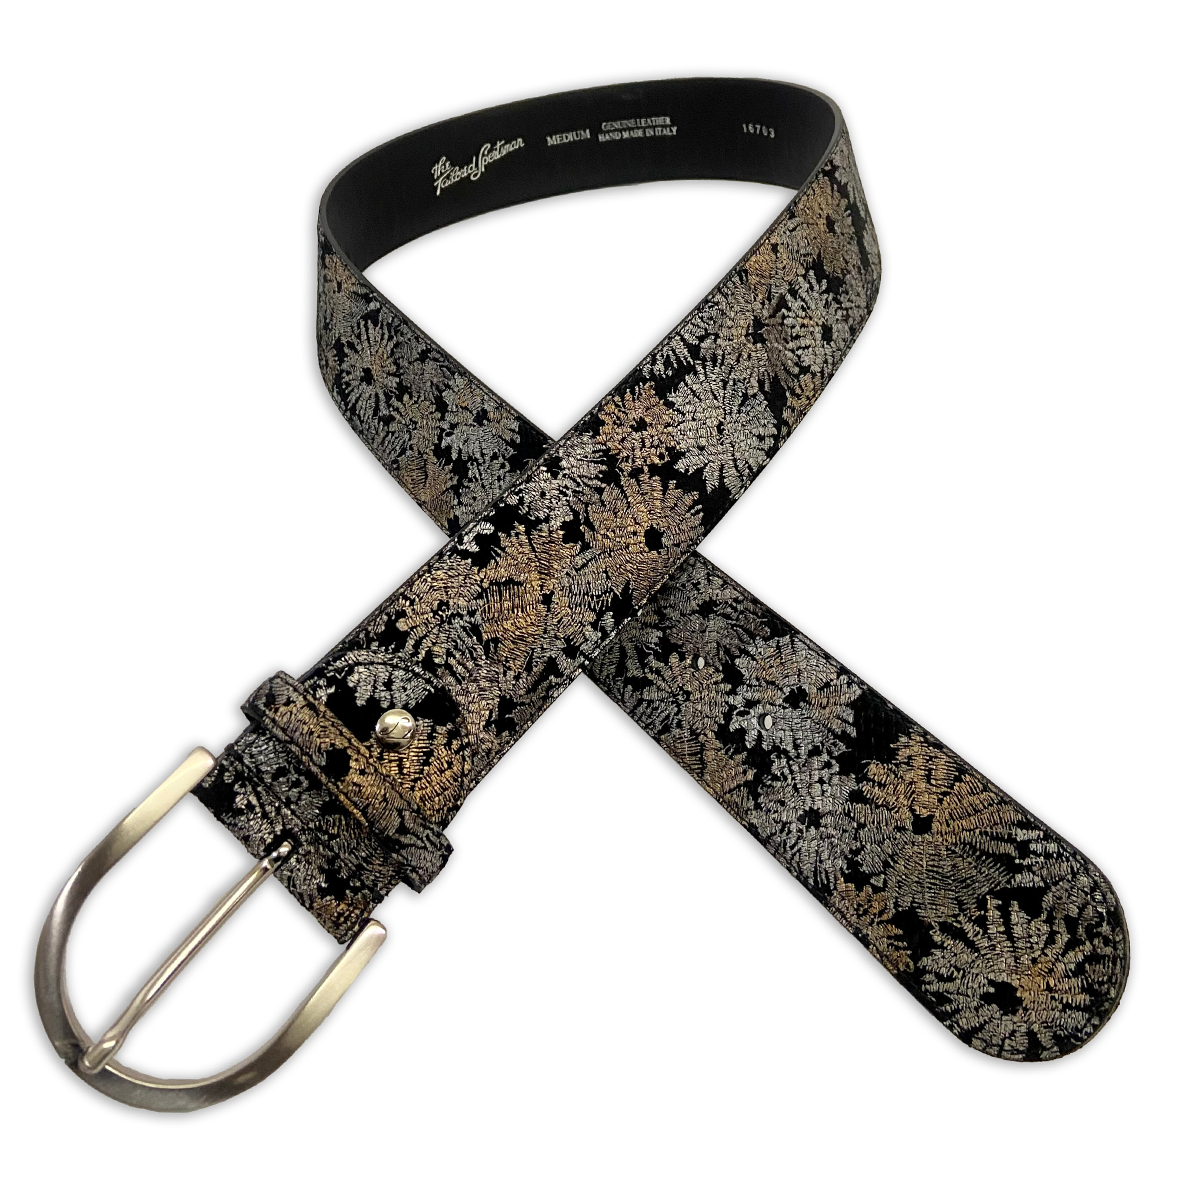 Tailored Sportsman Tapestry Leather Belt